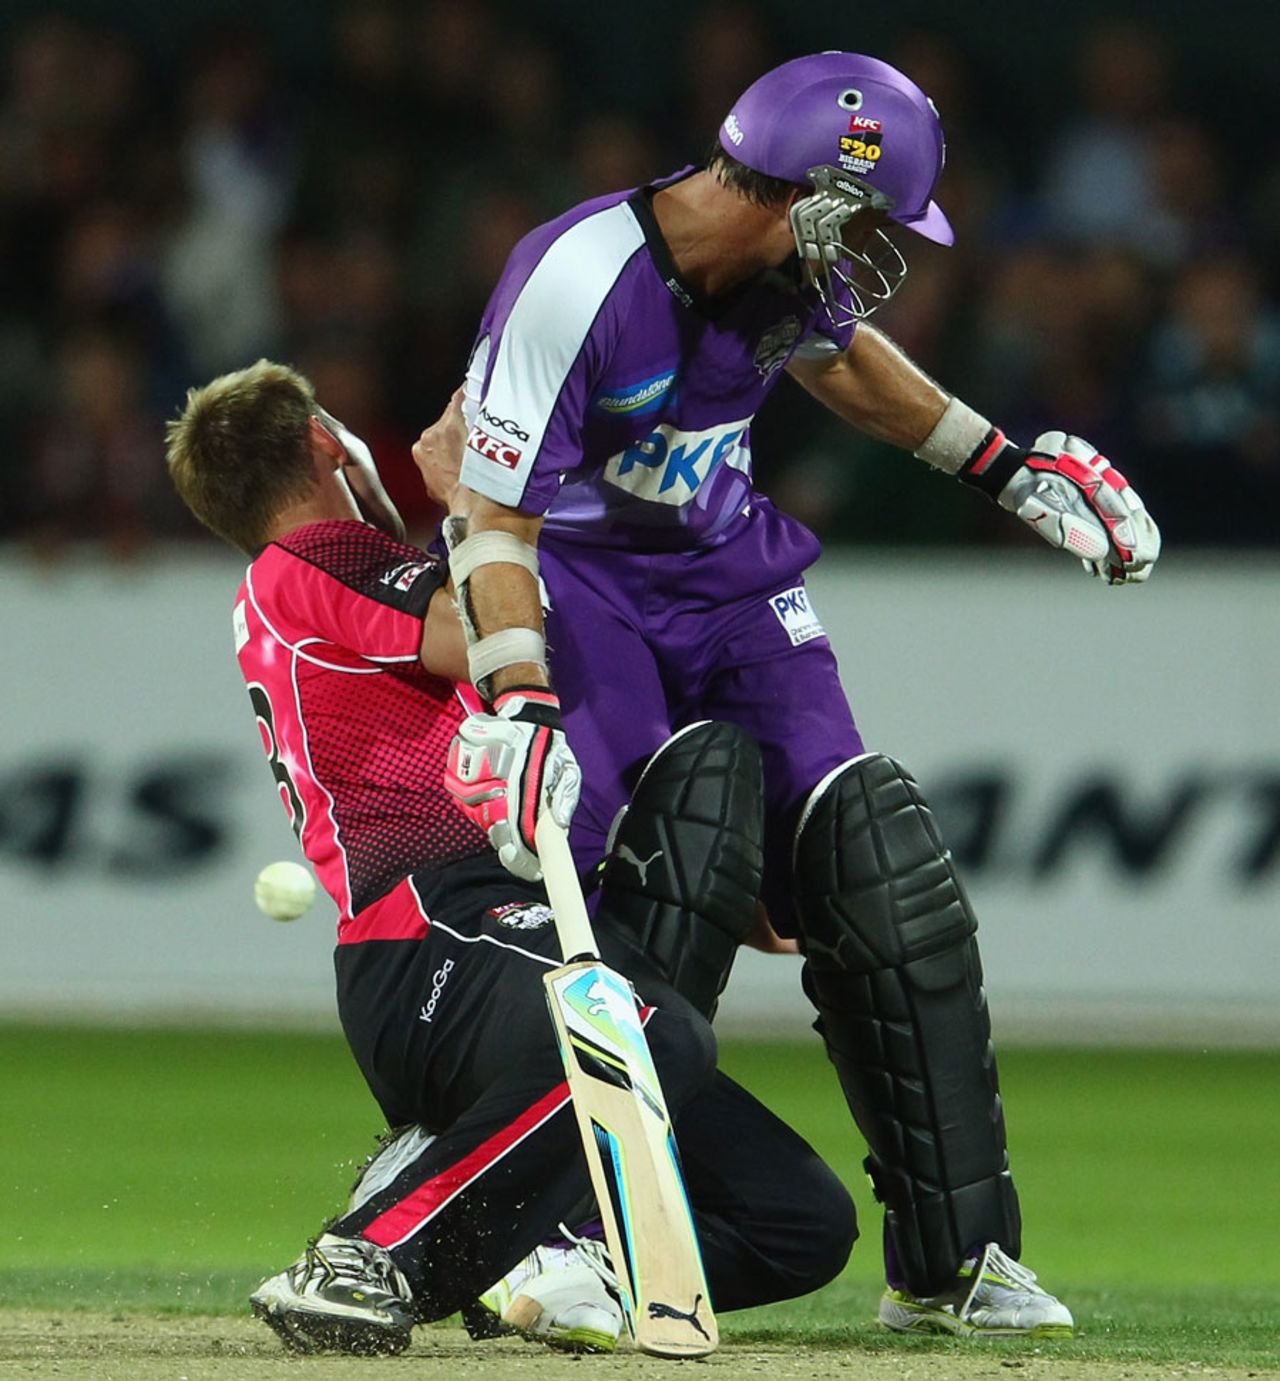 Brett Lee collides with Phil Jaques, Hobart Hurricanes v Sydney Sixers, 2nd semi-final, BBL 2011-12, Hobart, January 22, 2012 